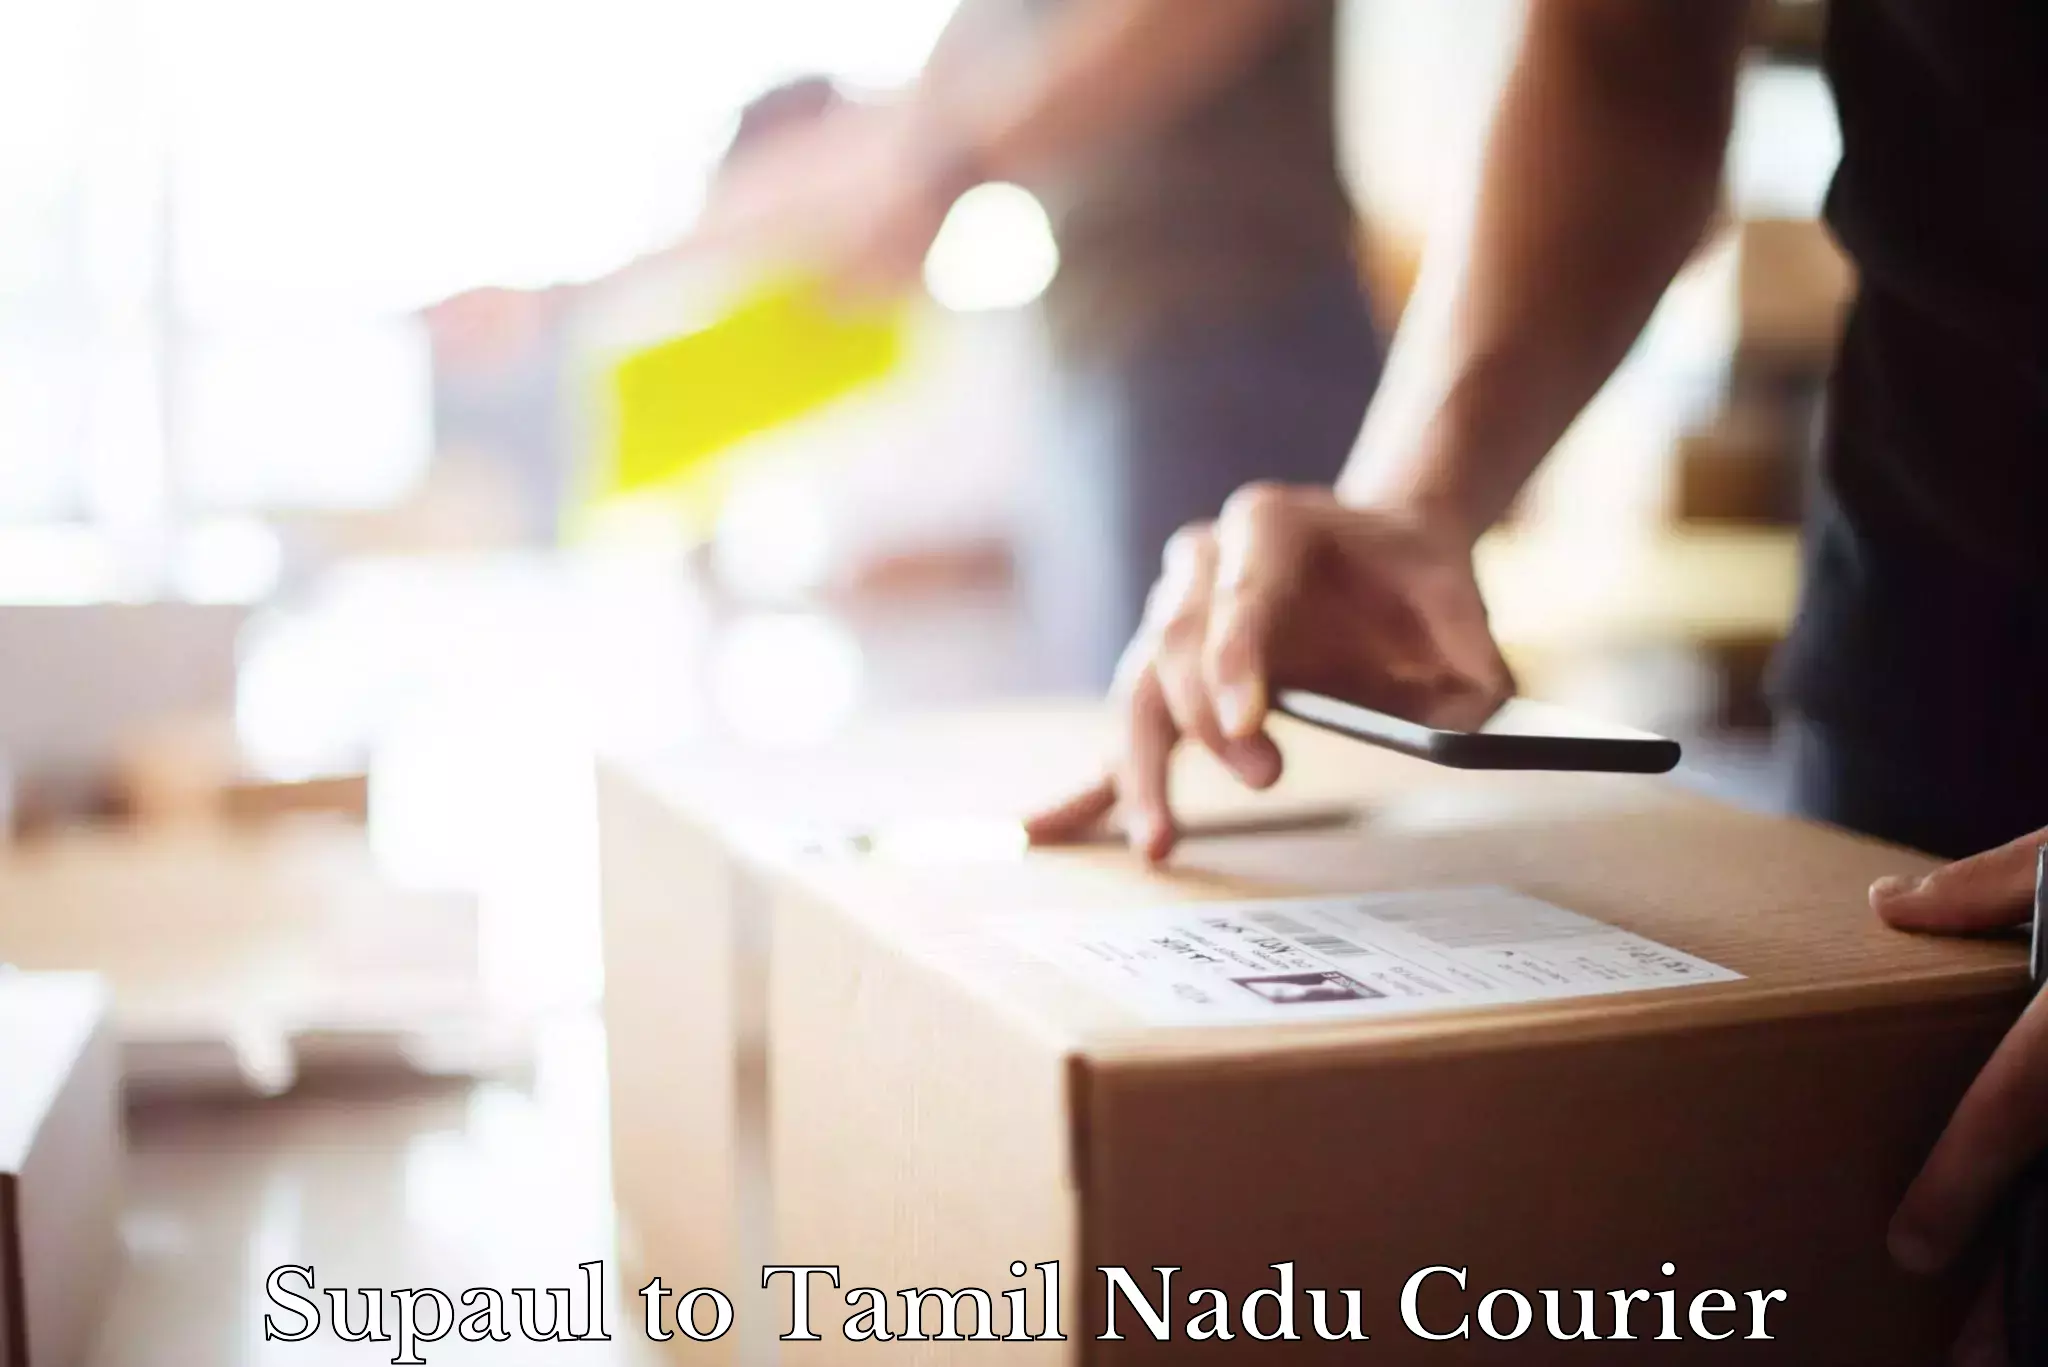 Express delivery network Supaul to Tamil Nadu